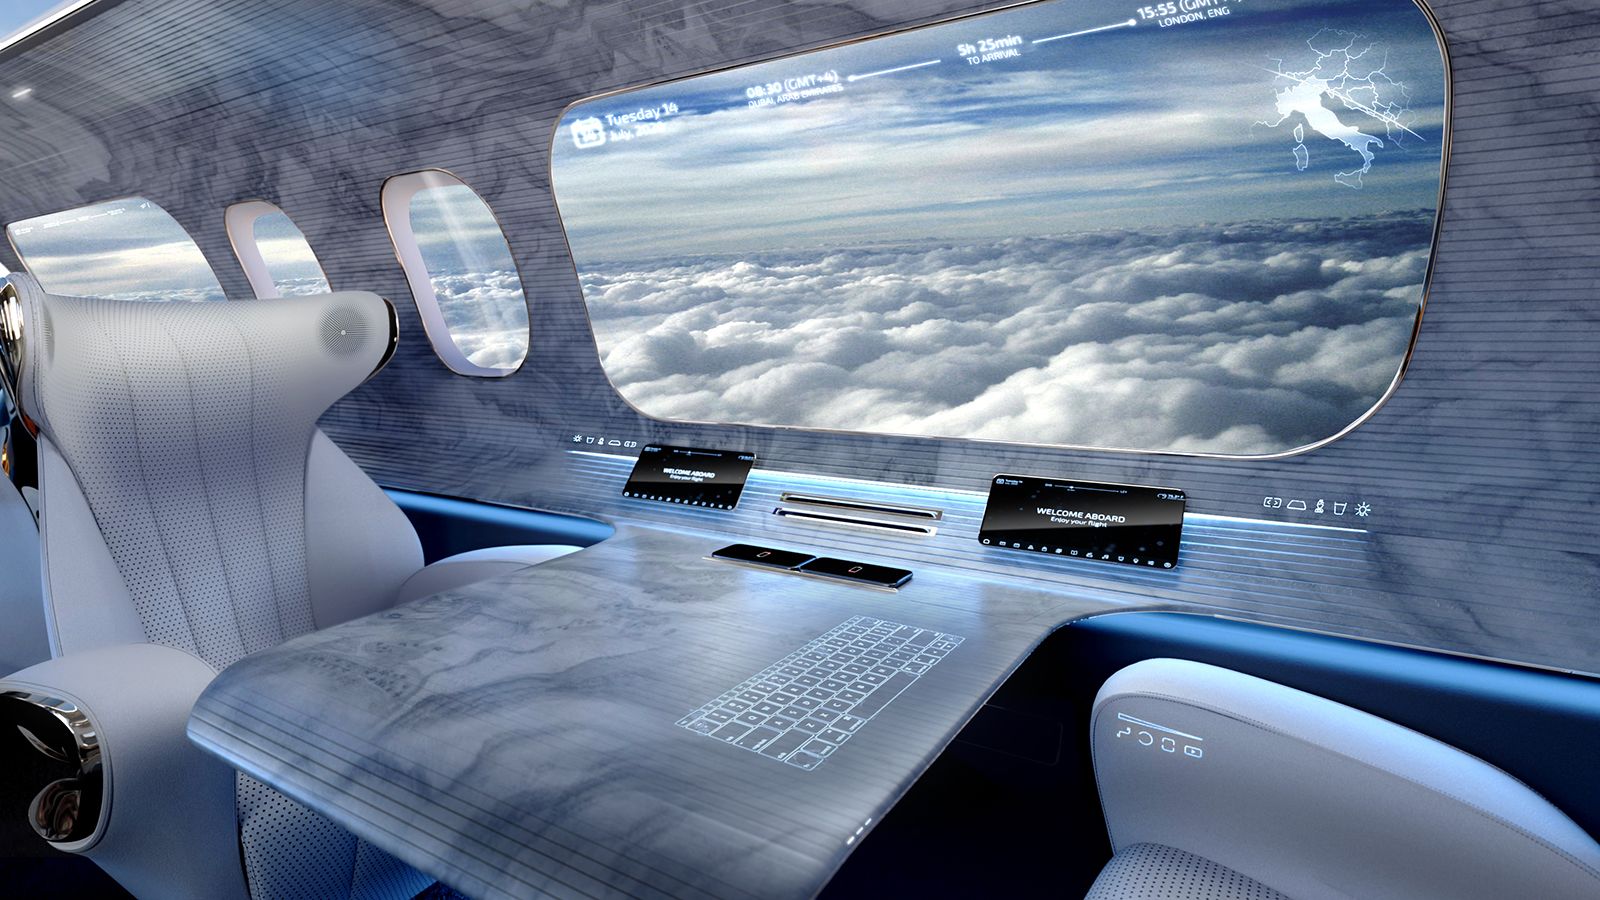 The windowless cabin design that could be the future of air travel